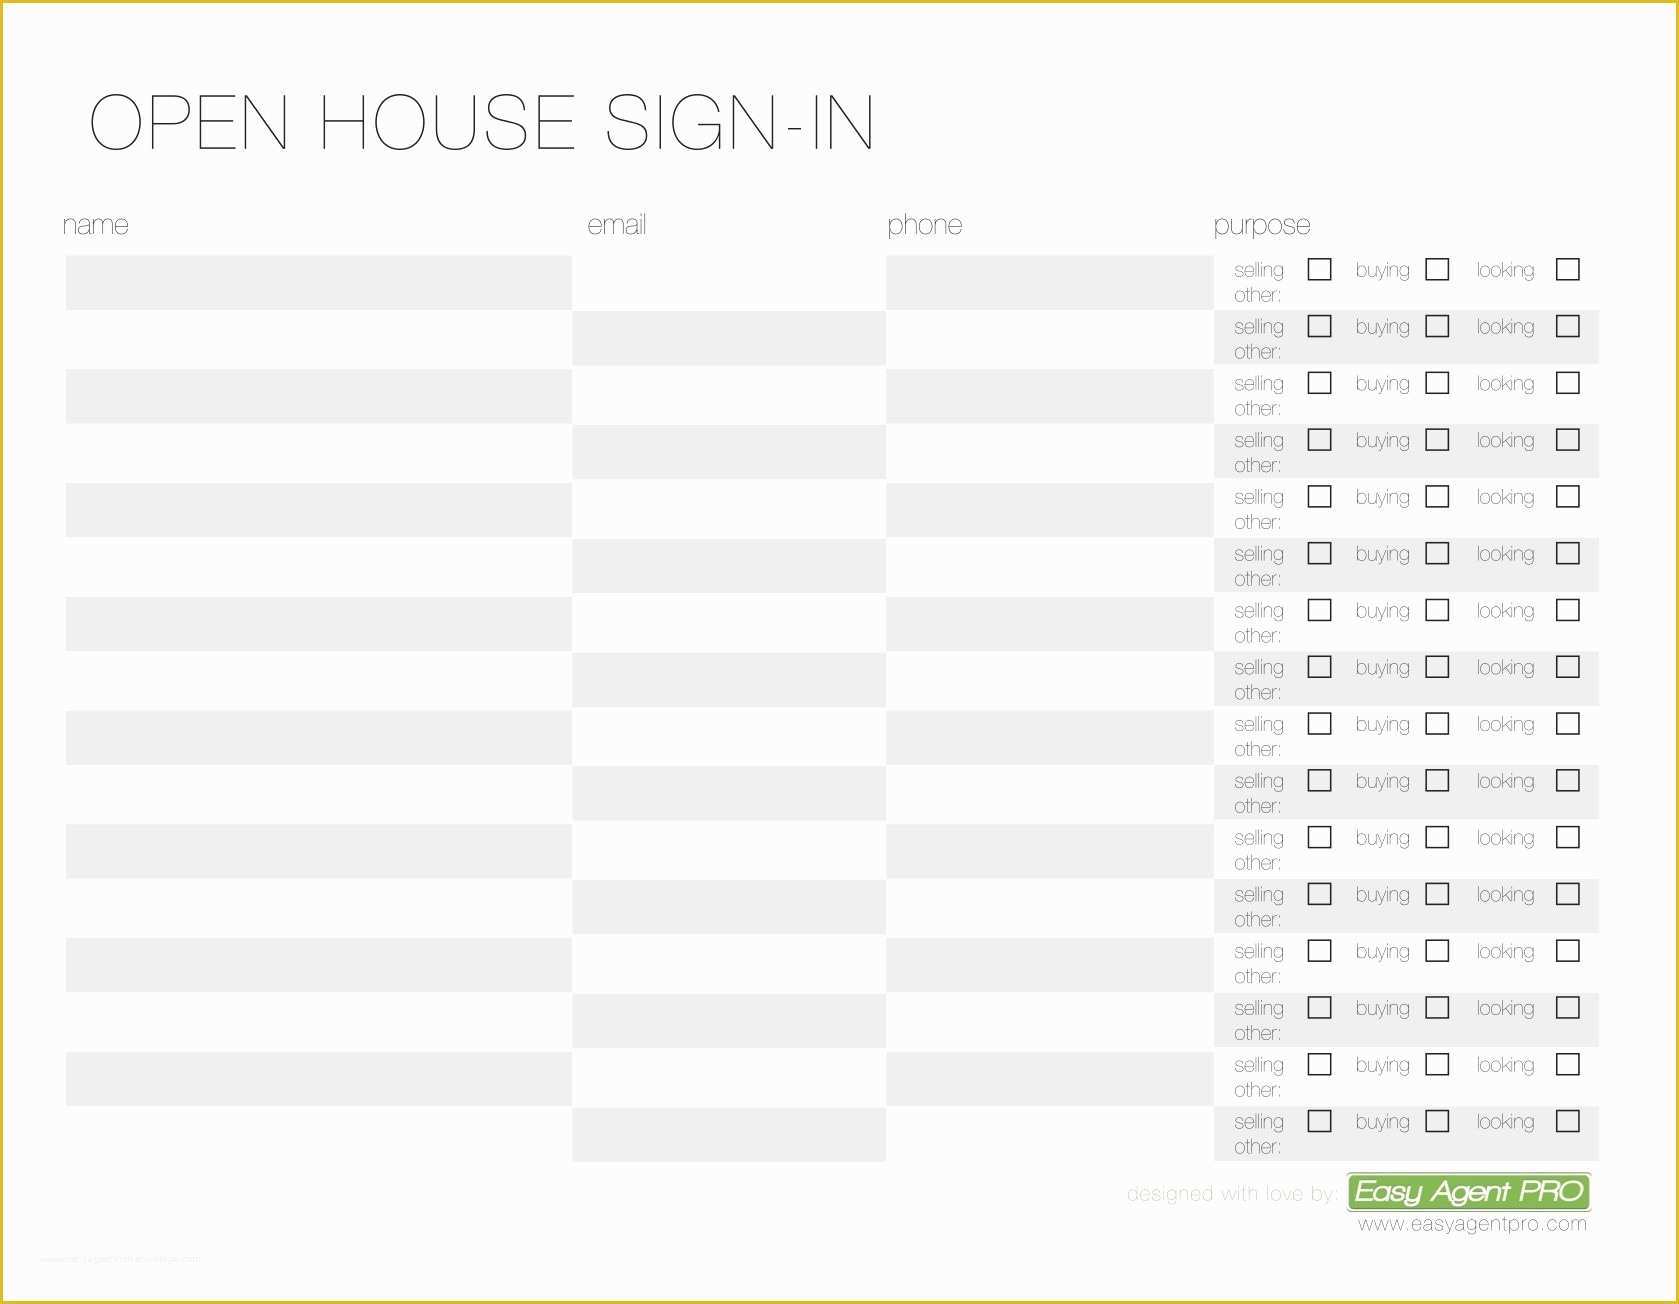 Guest House Website Templates Free Download Of Free Sign In Templates Printable Pics – Sign Up Sheets 58